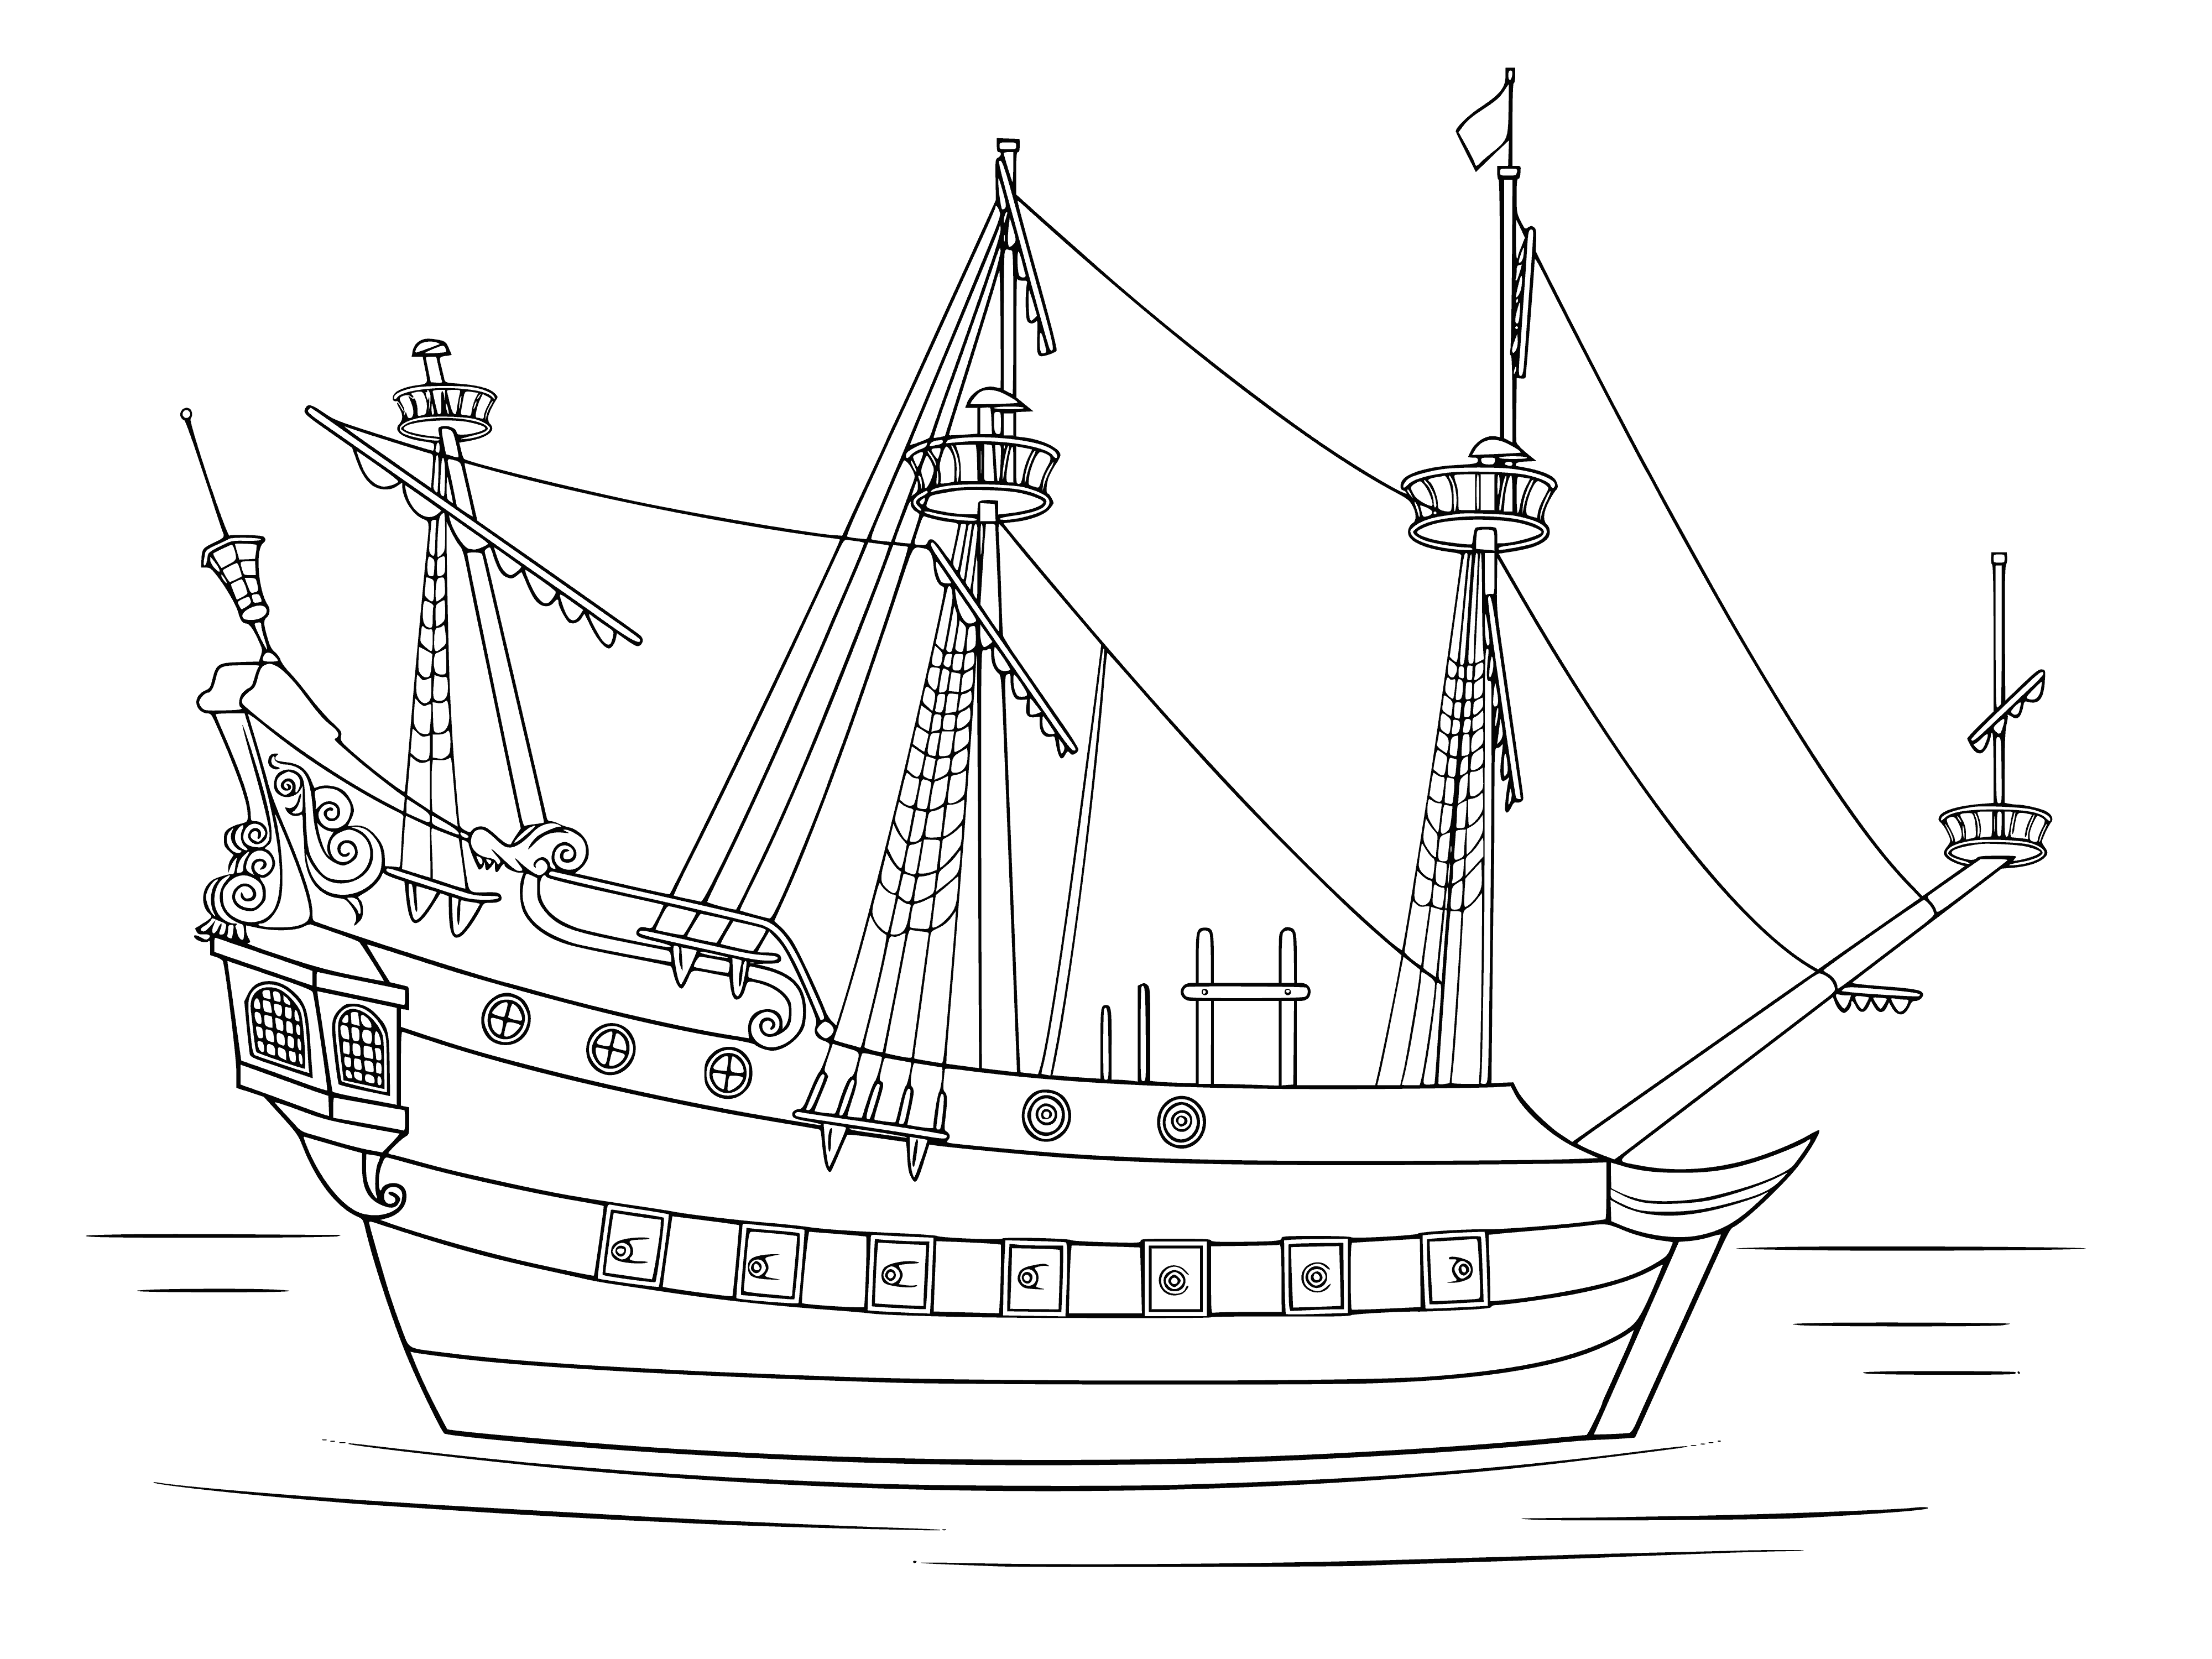 coloring page: A beautiful old sailboat is docked in a calm harbor. It has two masts and white-painted hull with sails and a cabin.